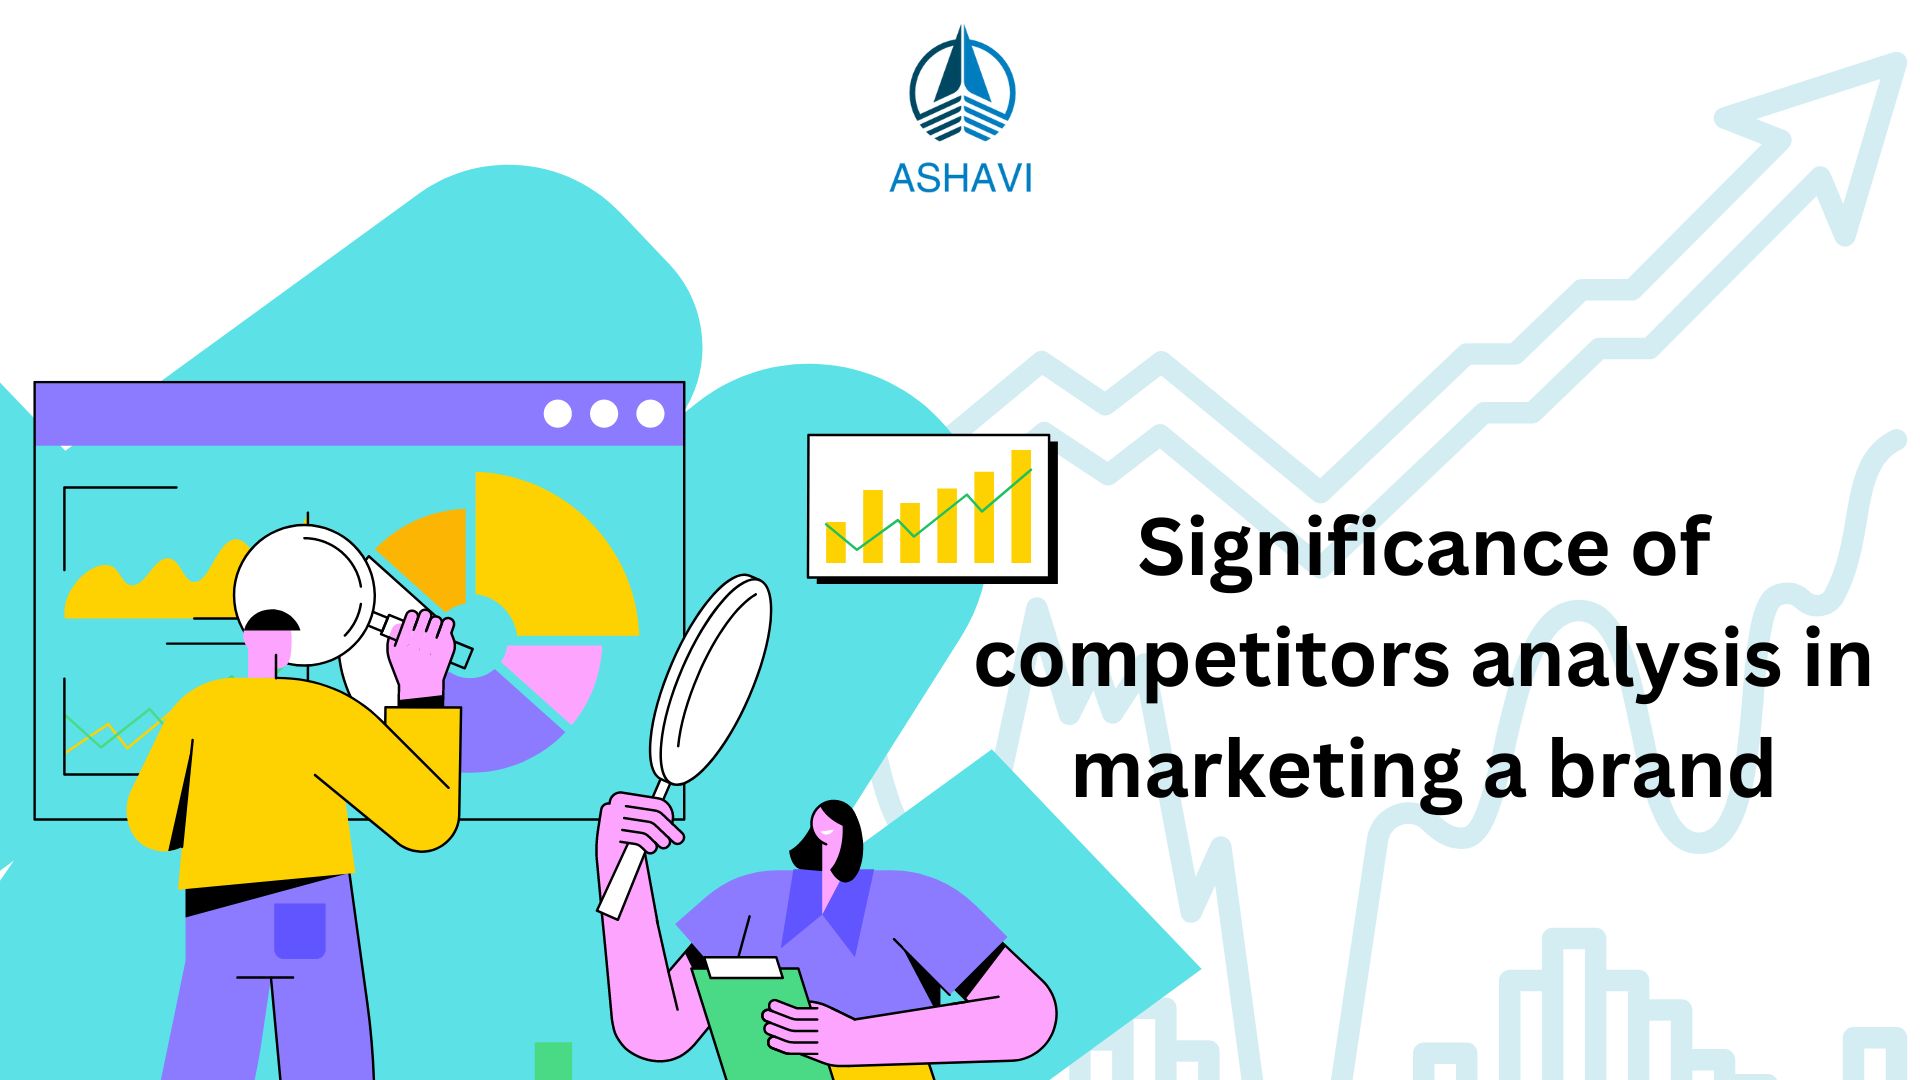 Significance of competitors analysis in marketing a brand